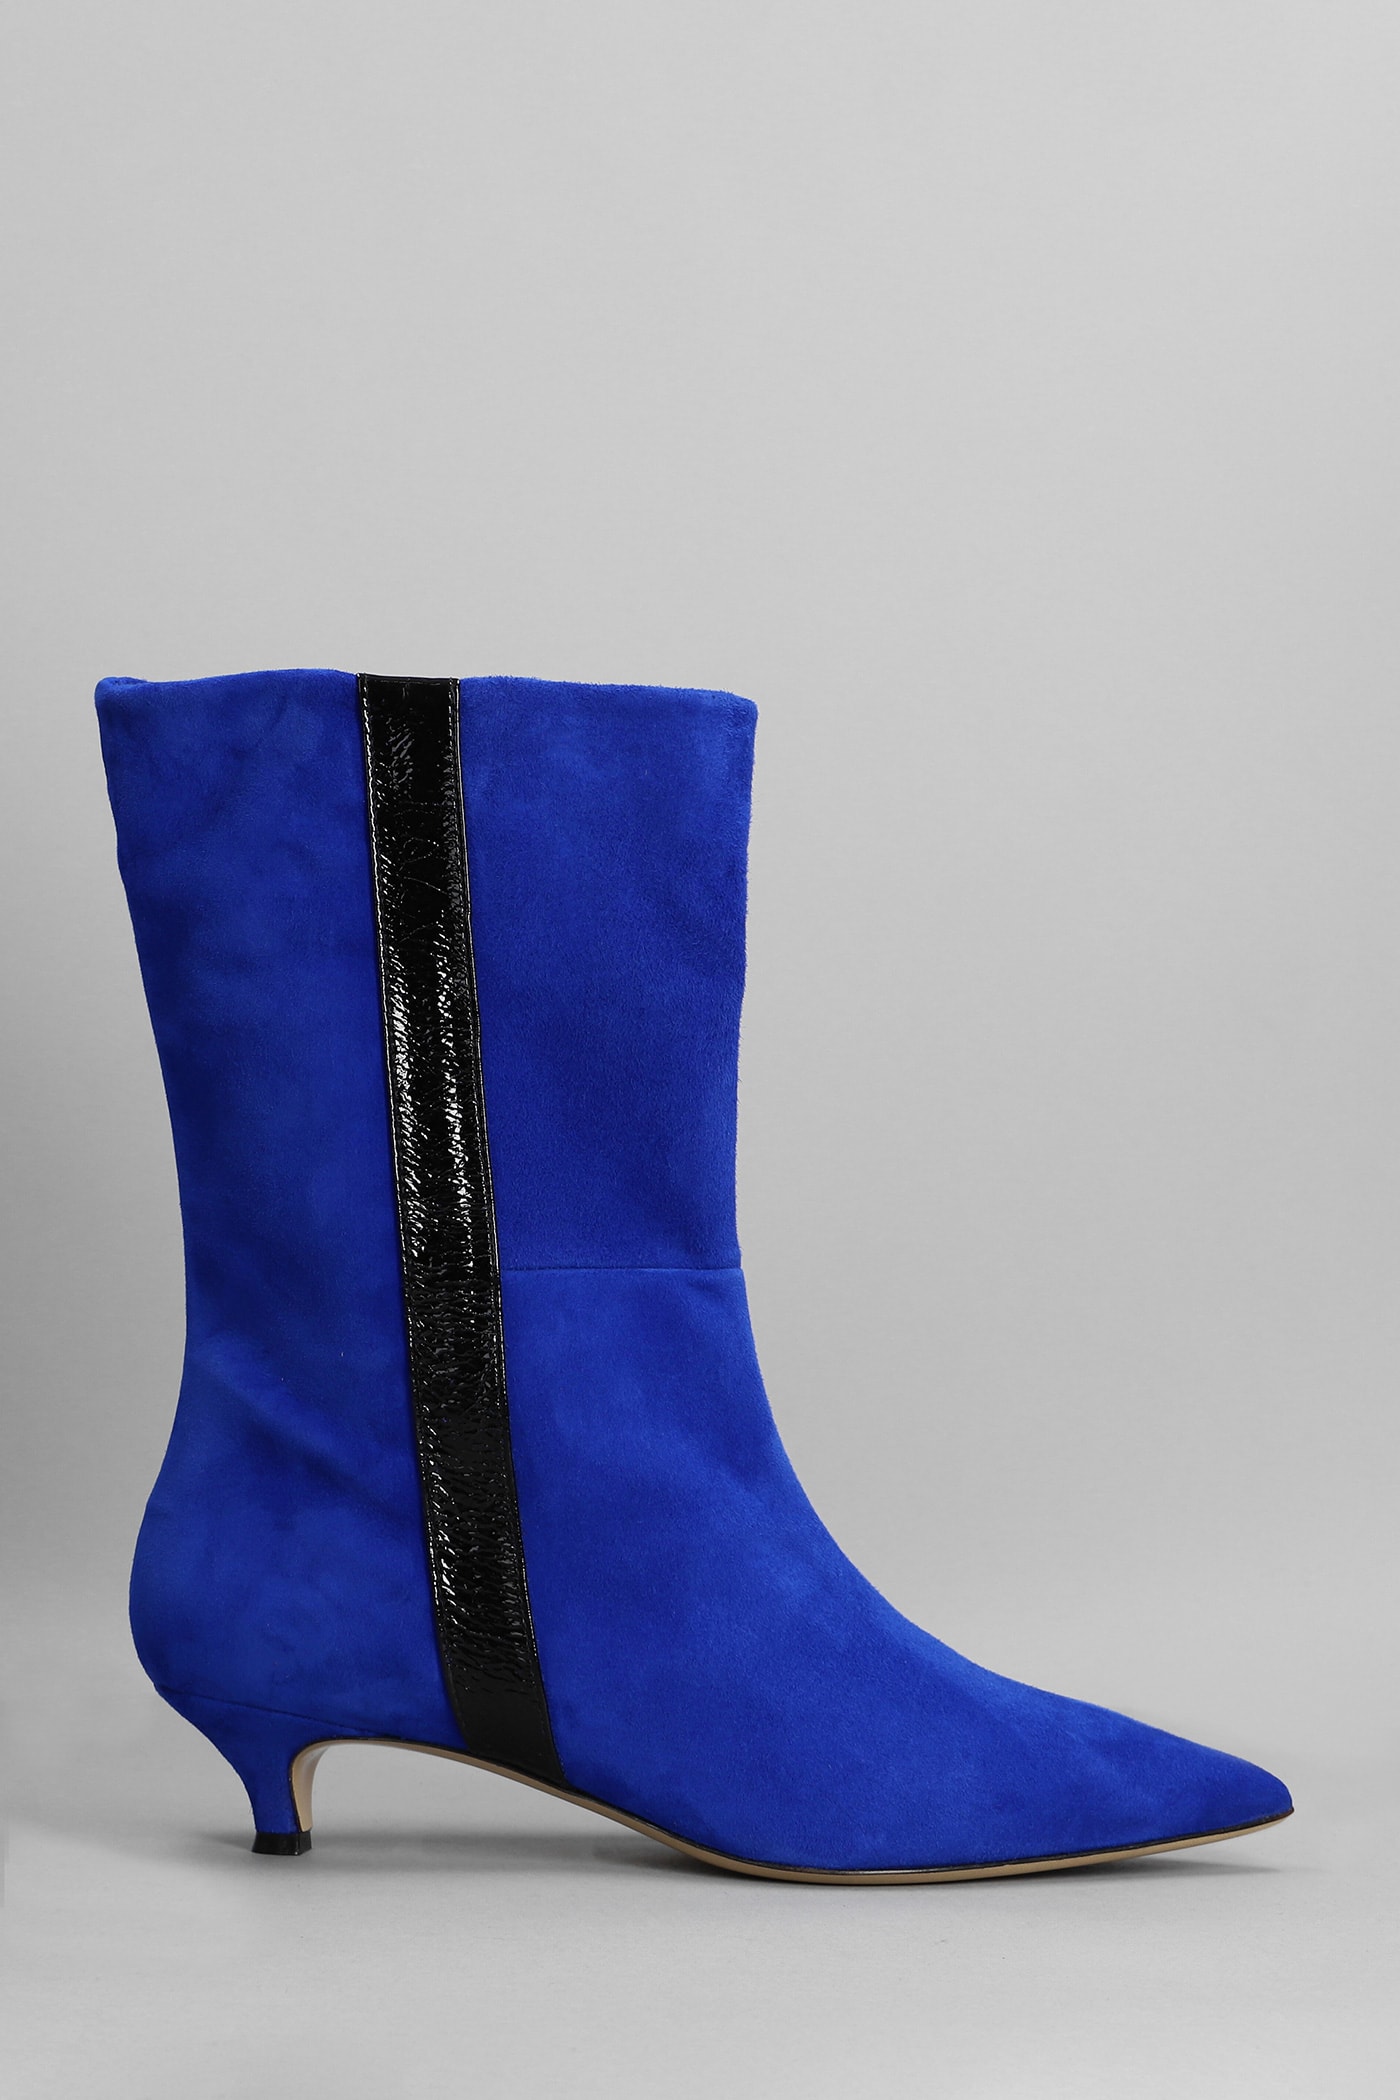 Alchimia High Heels Ankle Boots In Blue Suede